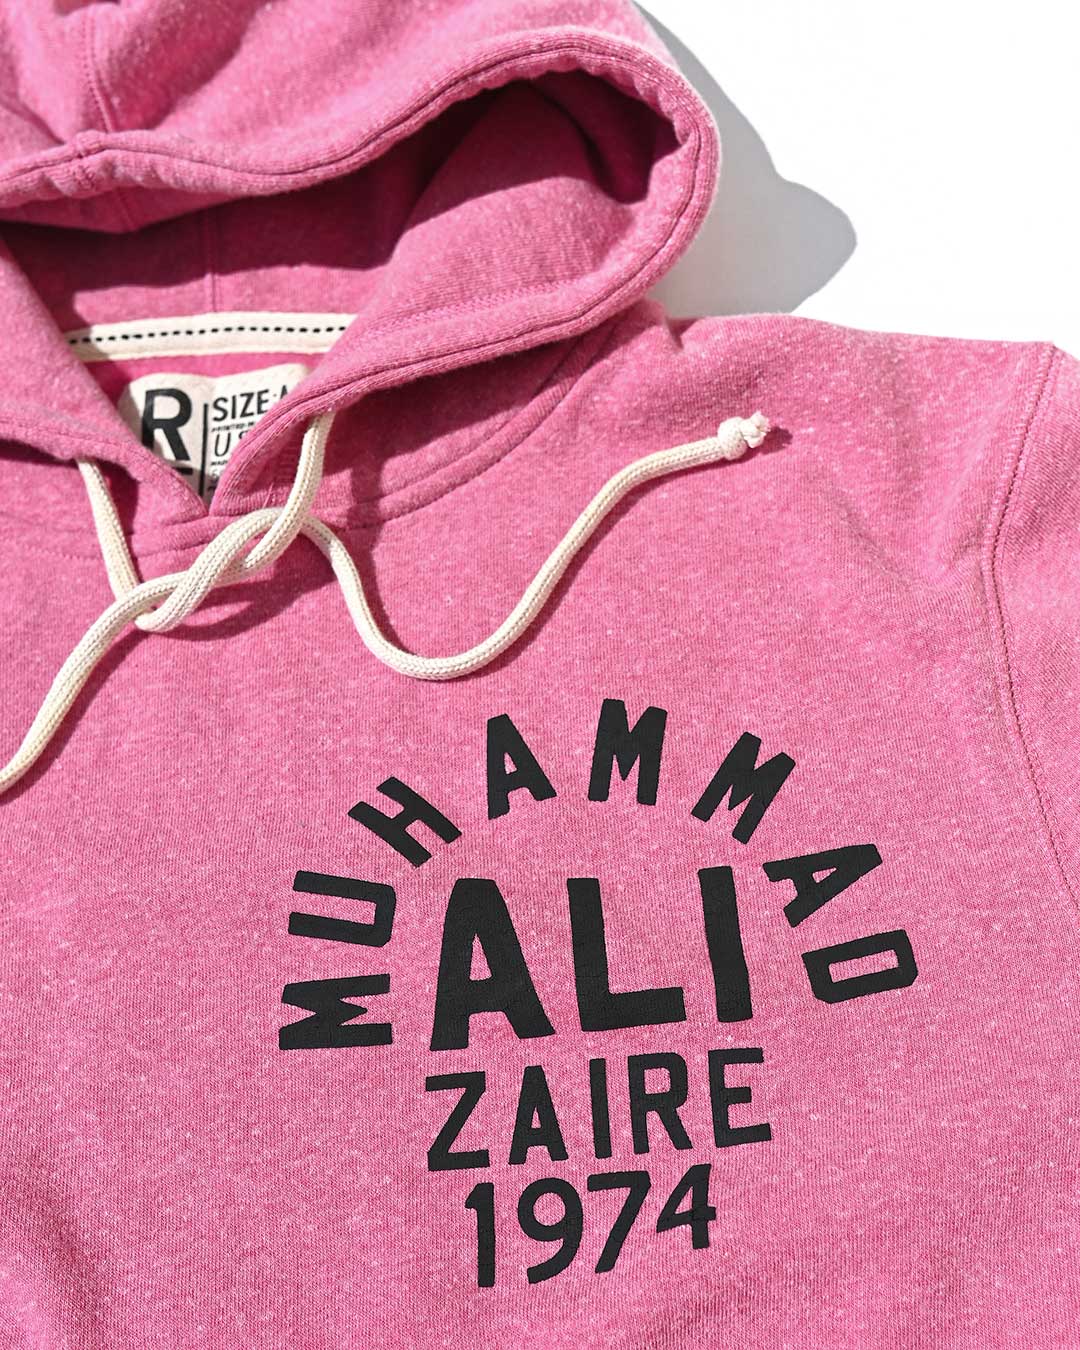 Ali Rumble in the Jungle Pink Hoody - Roots of Fight Canada